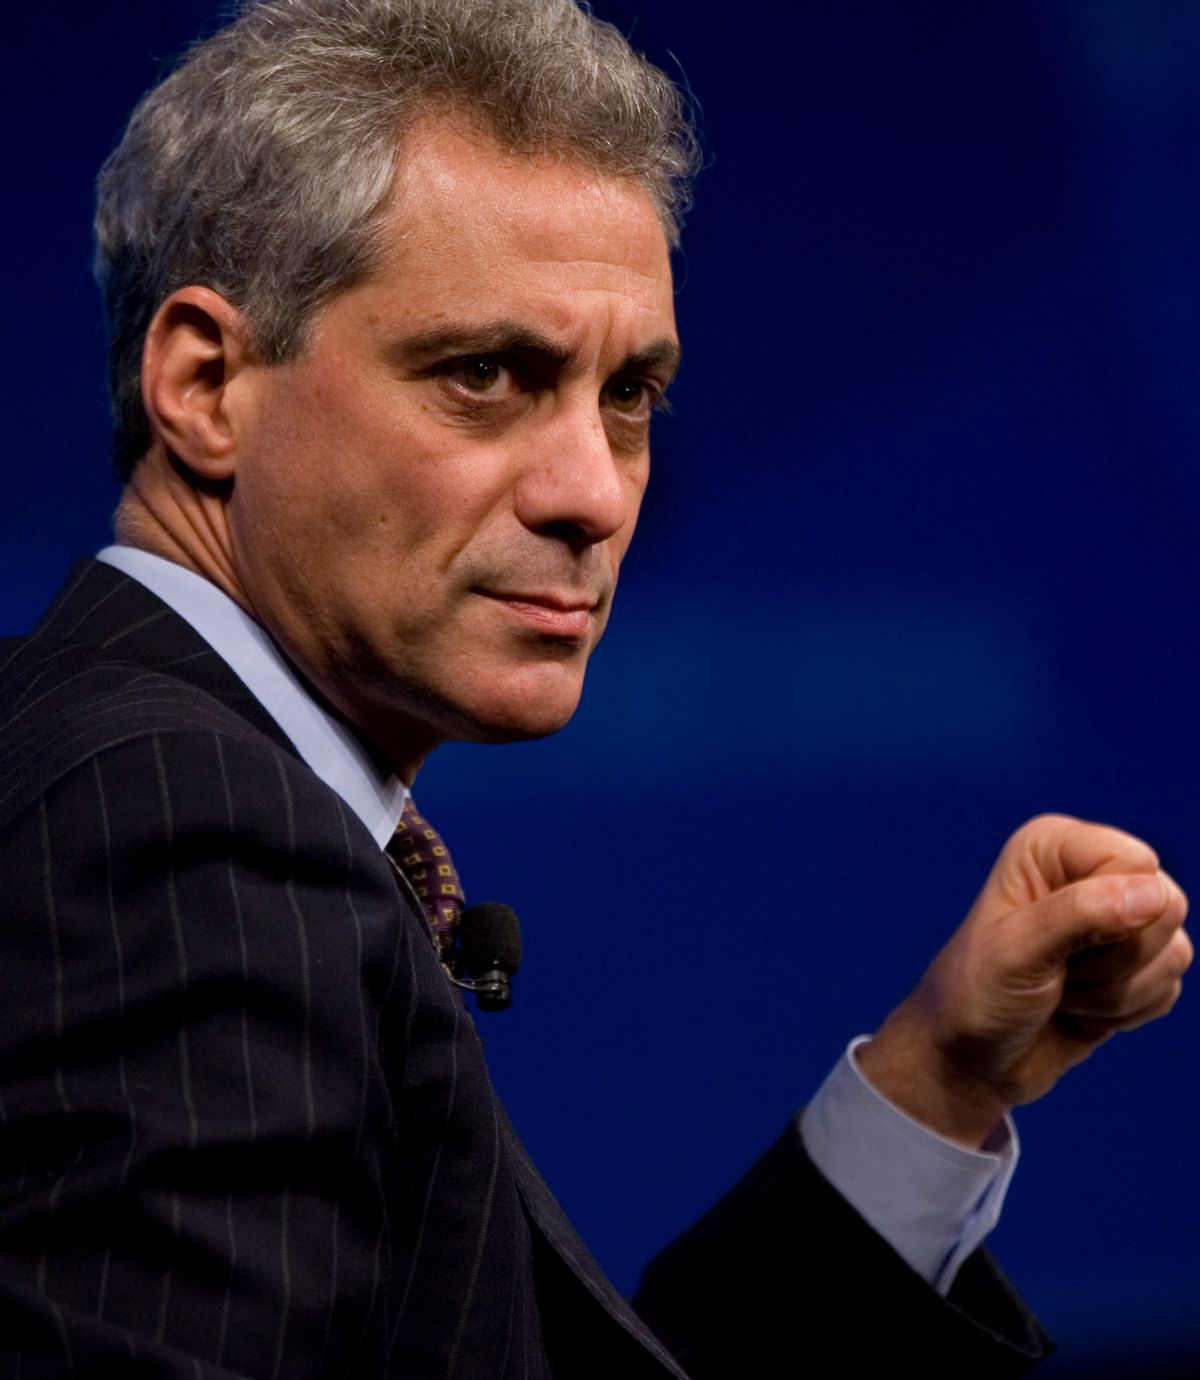 Rahm Emanuel, chief of staff for President-elect Barack Obama, addresses a gathering of corporate CEOs at an economic conference sponsored by The Wall Street Journal, at the Four Seasons Hotel in Washington, Tuesday, Nov. 18, 2008. Emanuel was a senior advisor to President Bill Clinton and has represented the Fifth Congressional District of Illinois in the House of Representatives since 2002. (AP Photo/J. Scott Applewhite) (Associated Press)